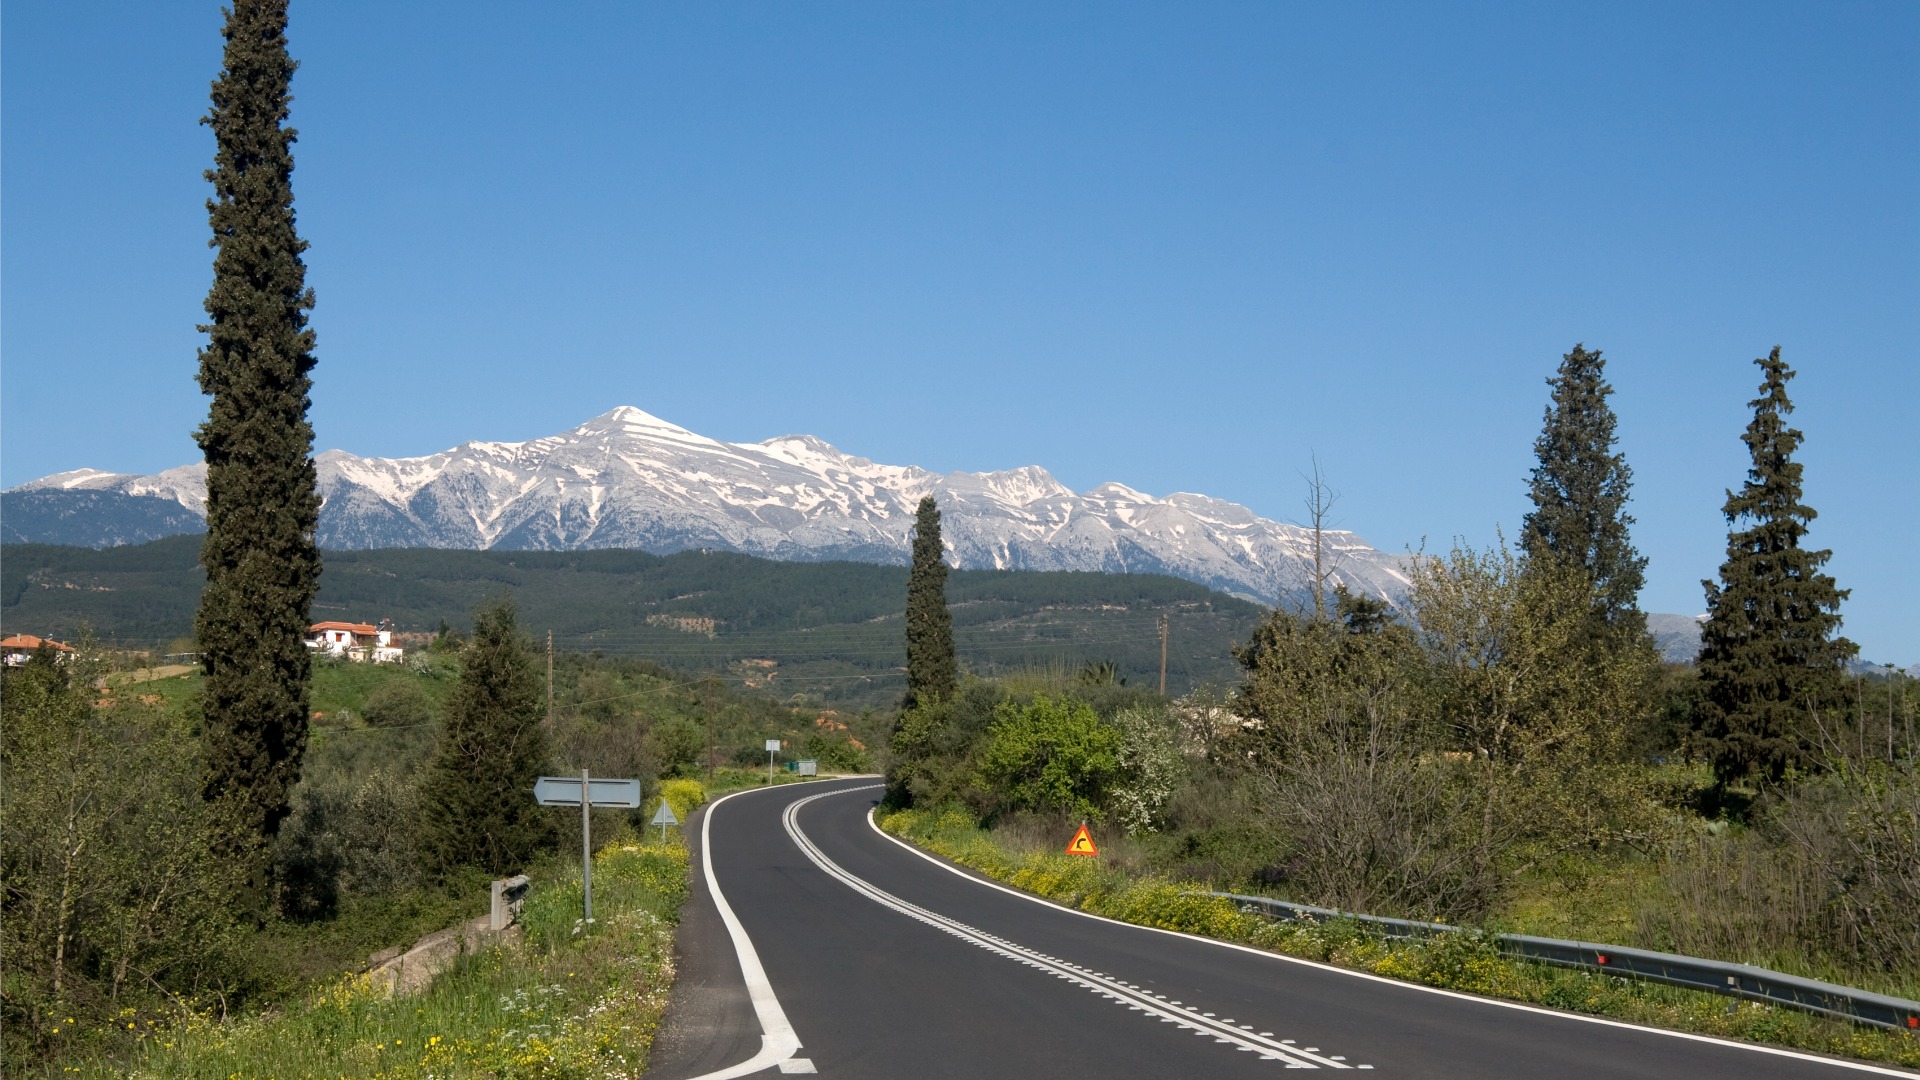 This image shows a road zigzagging through the countryside with snow-capped mountains in the background.